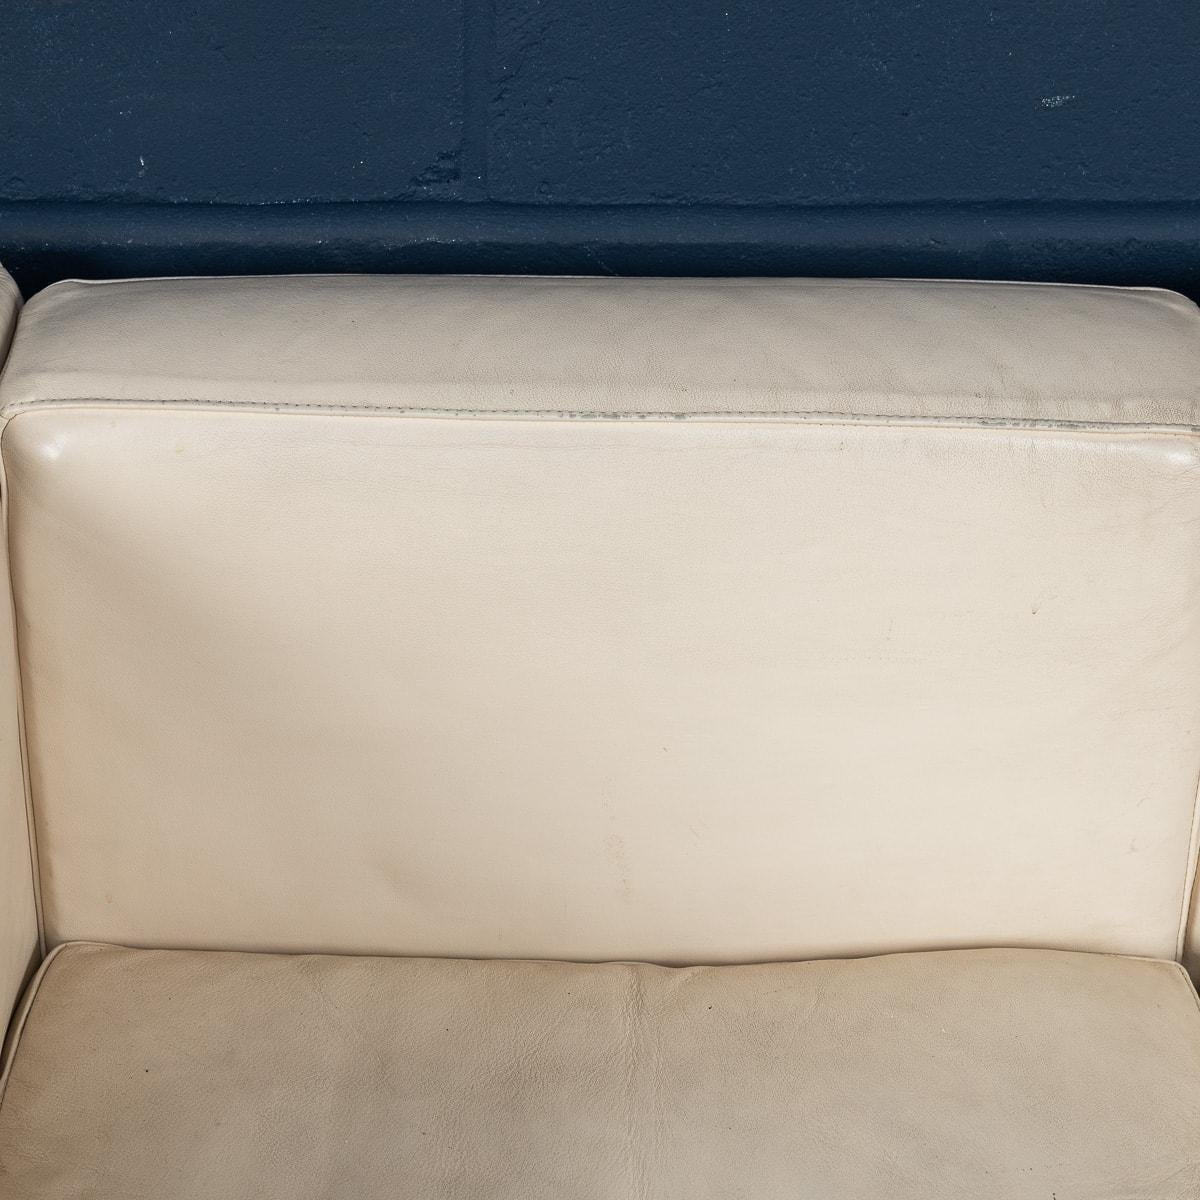 20th Century Leather Sofa In The Manner Of Le Corbusier, Italy c.1980 For Sale 7